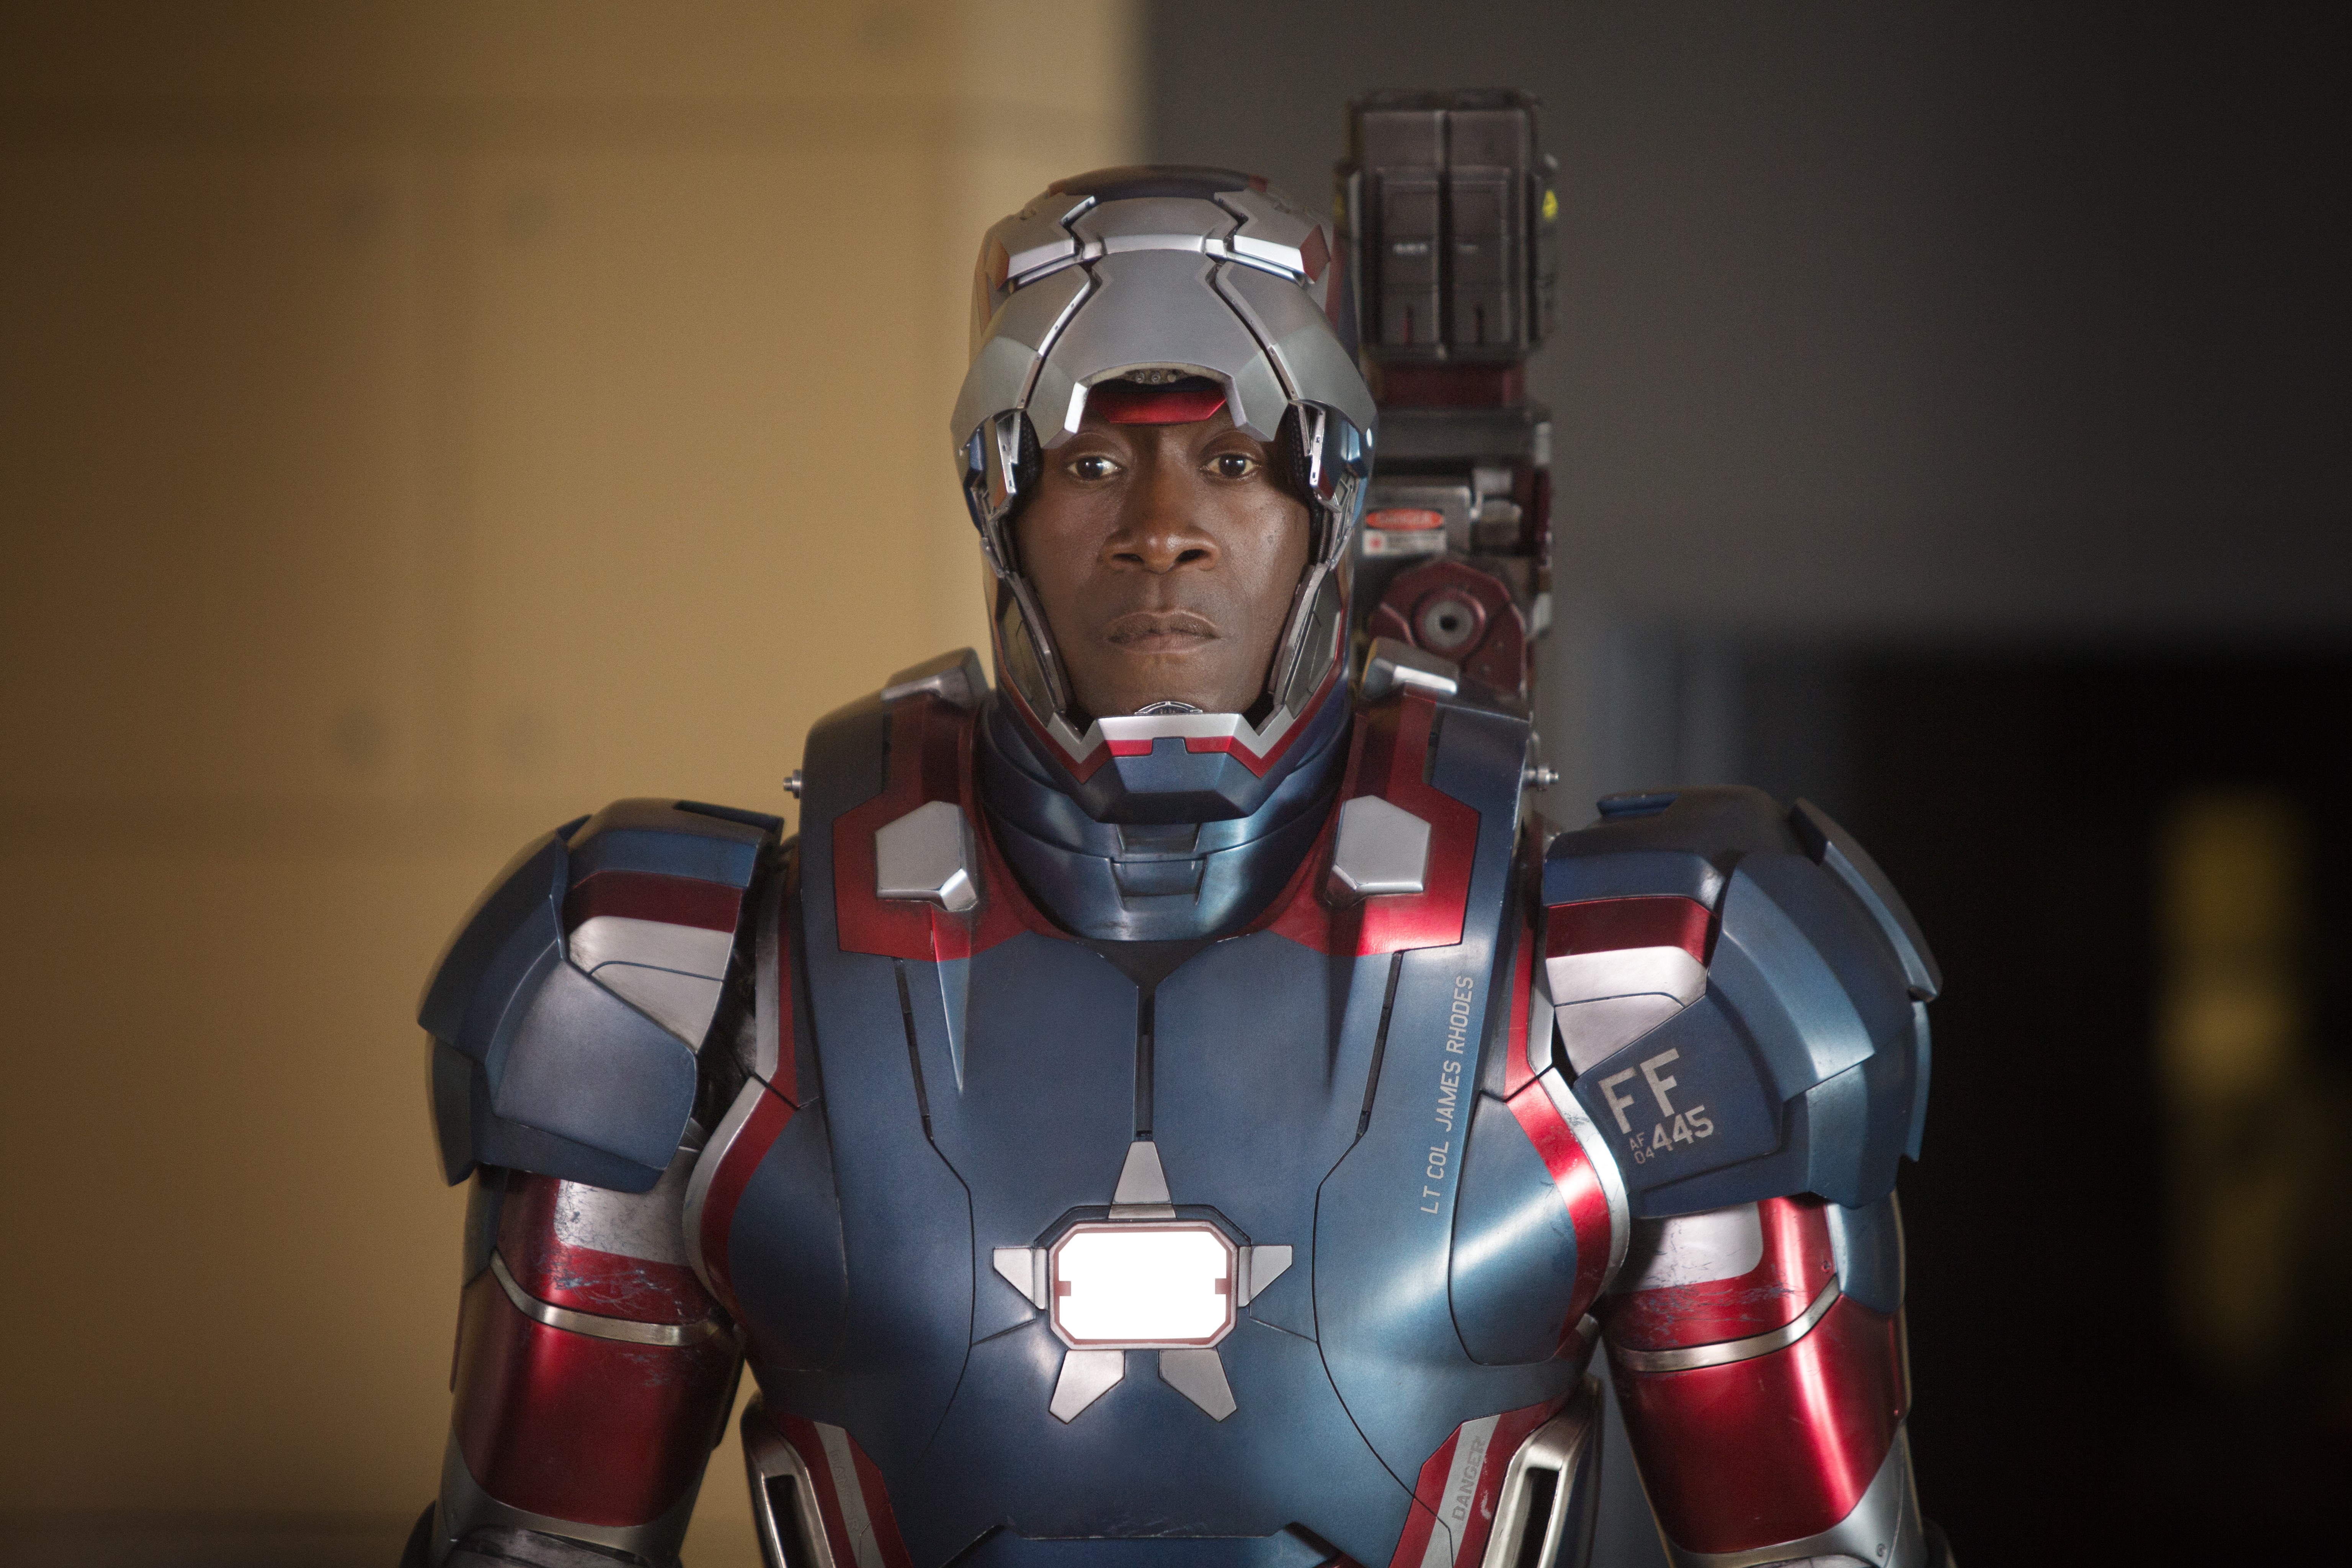 In Iron Man 2 War Machine has ED 445 FLTS on his shoulder. This is the  tail code for the 445th Flight Test Squadron out of Edwards Air Force Base,  which is